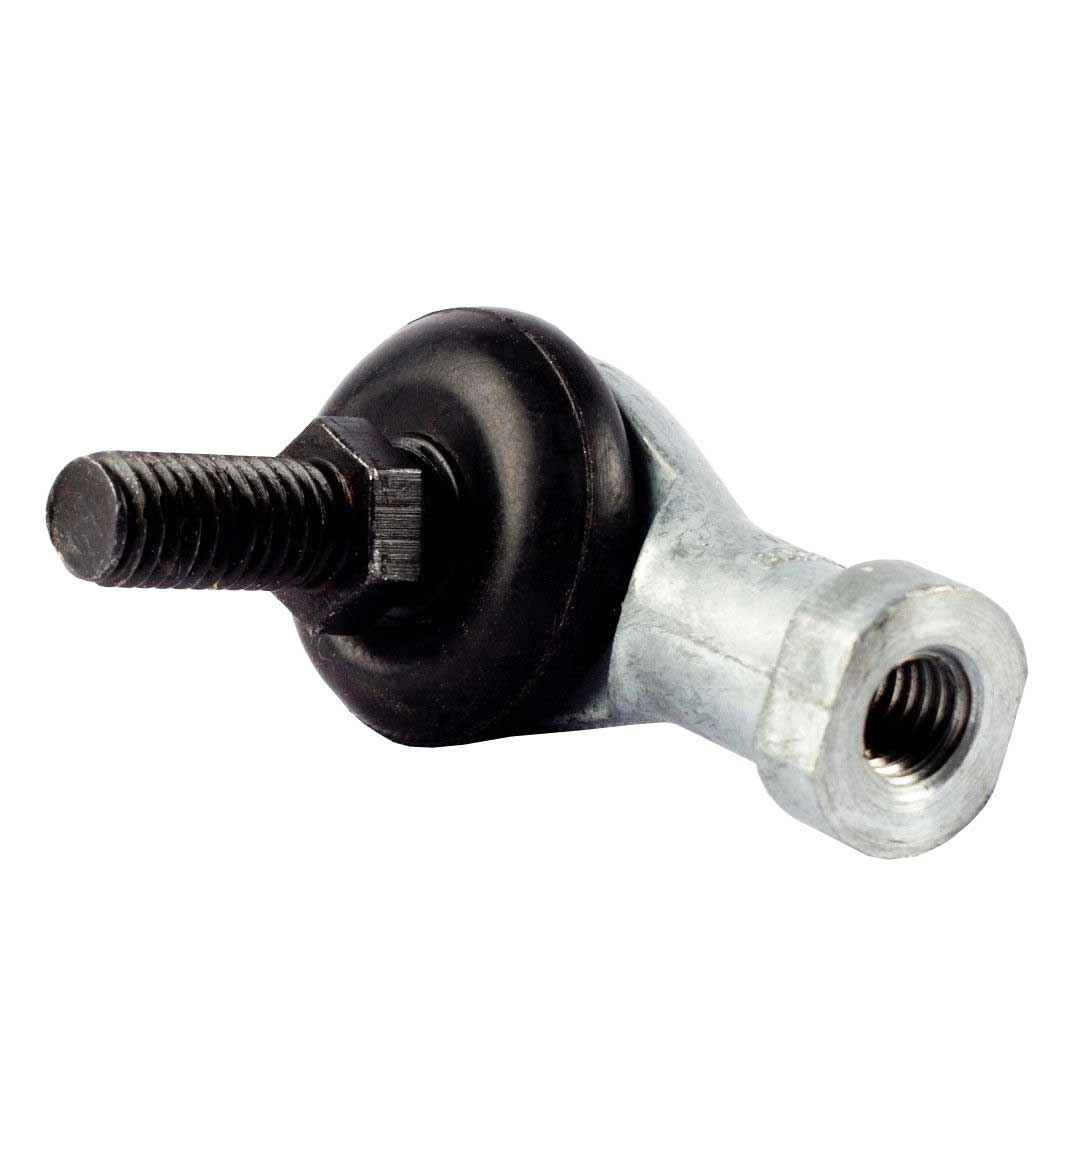 M10 x 1.25mm Male-Female Ball Joint / Track Rod End